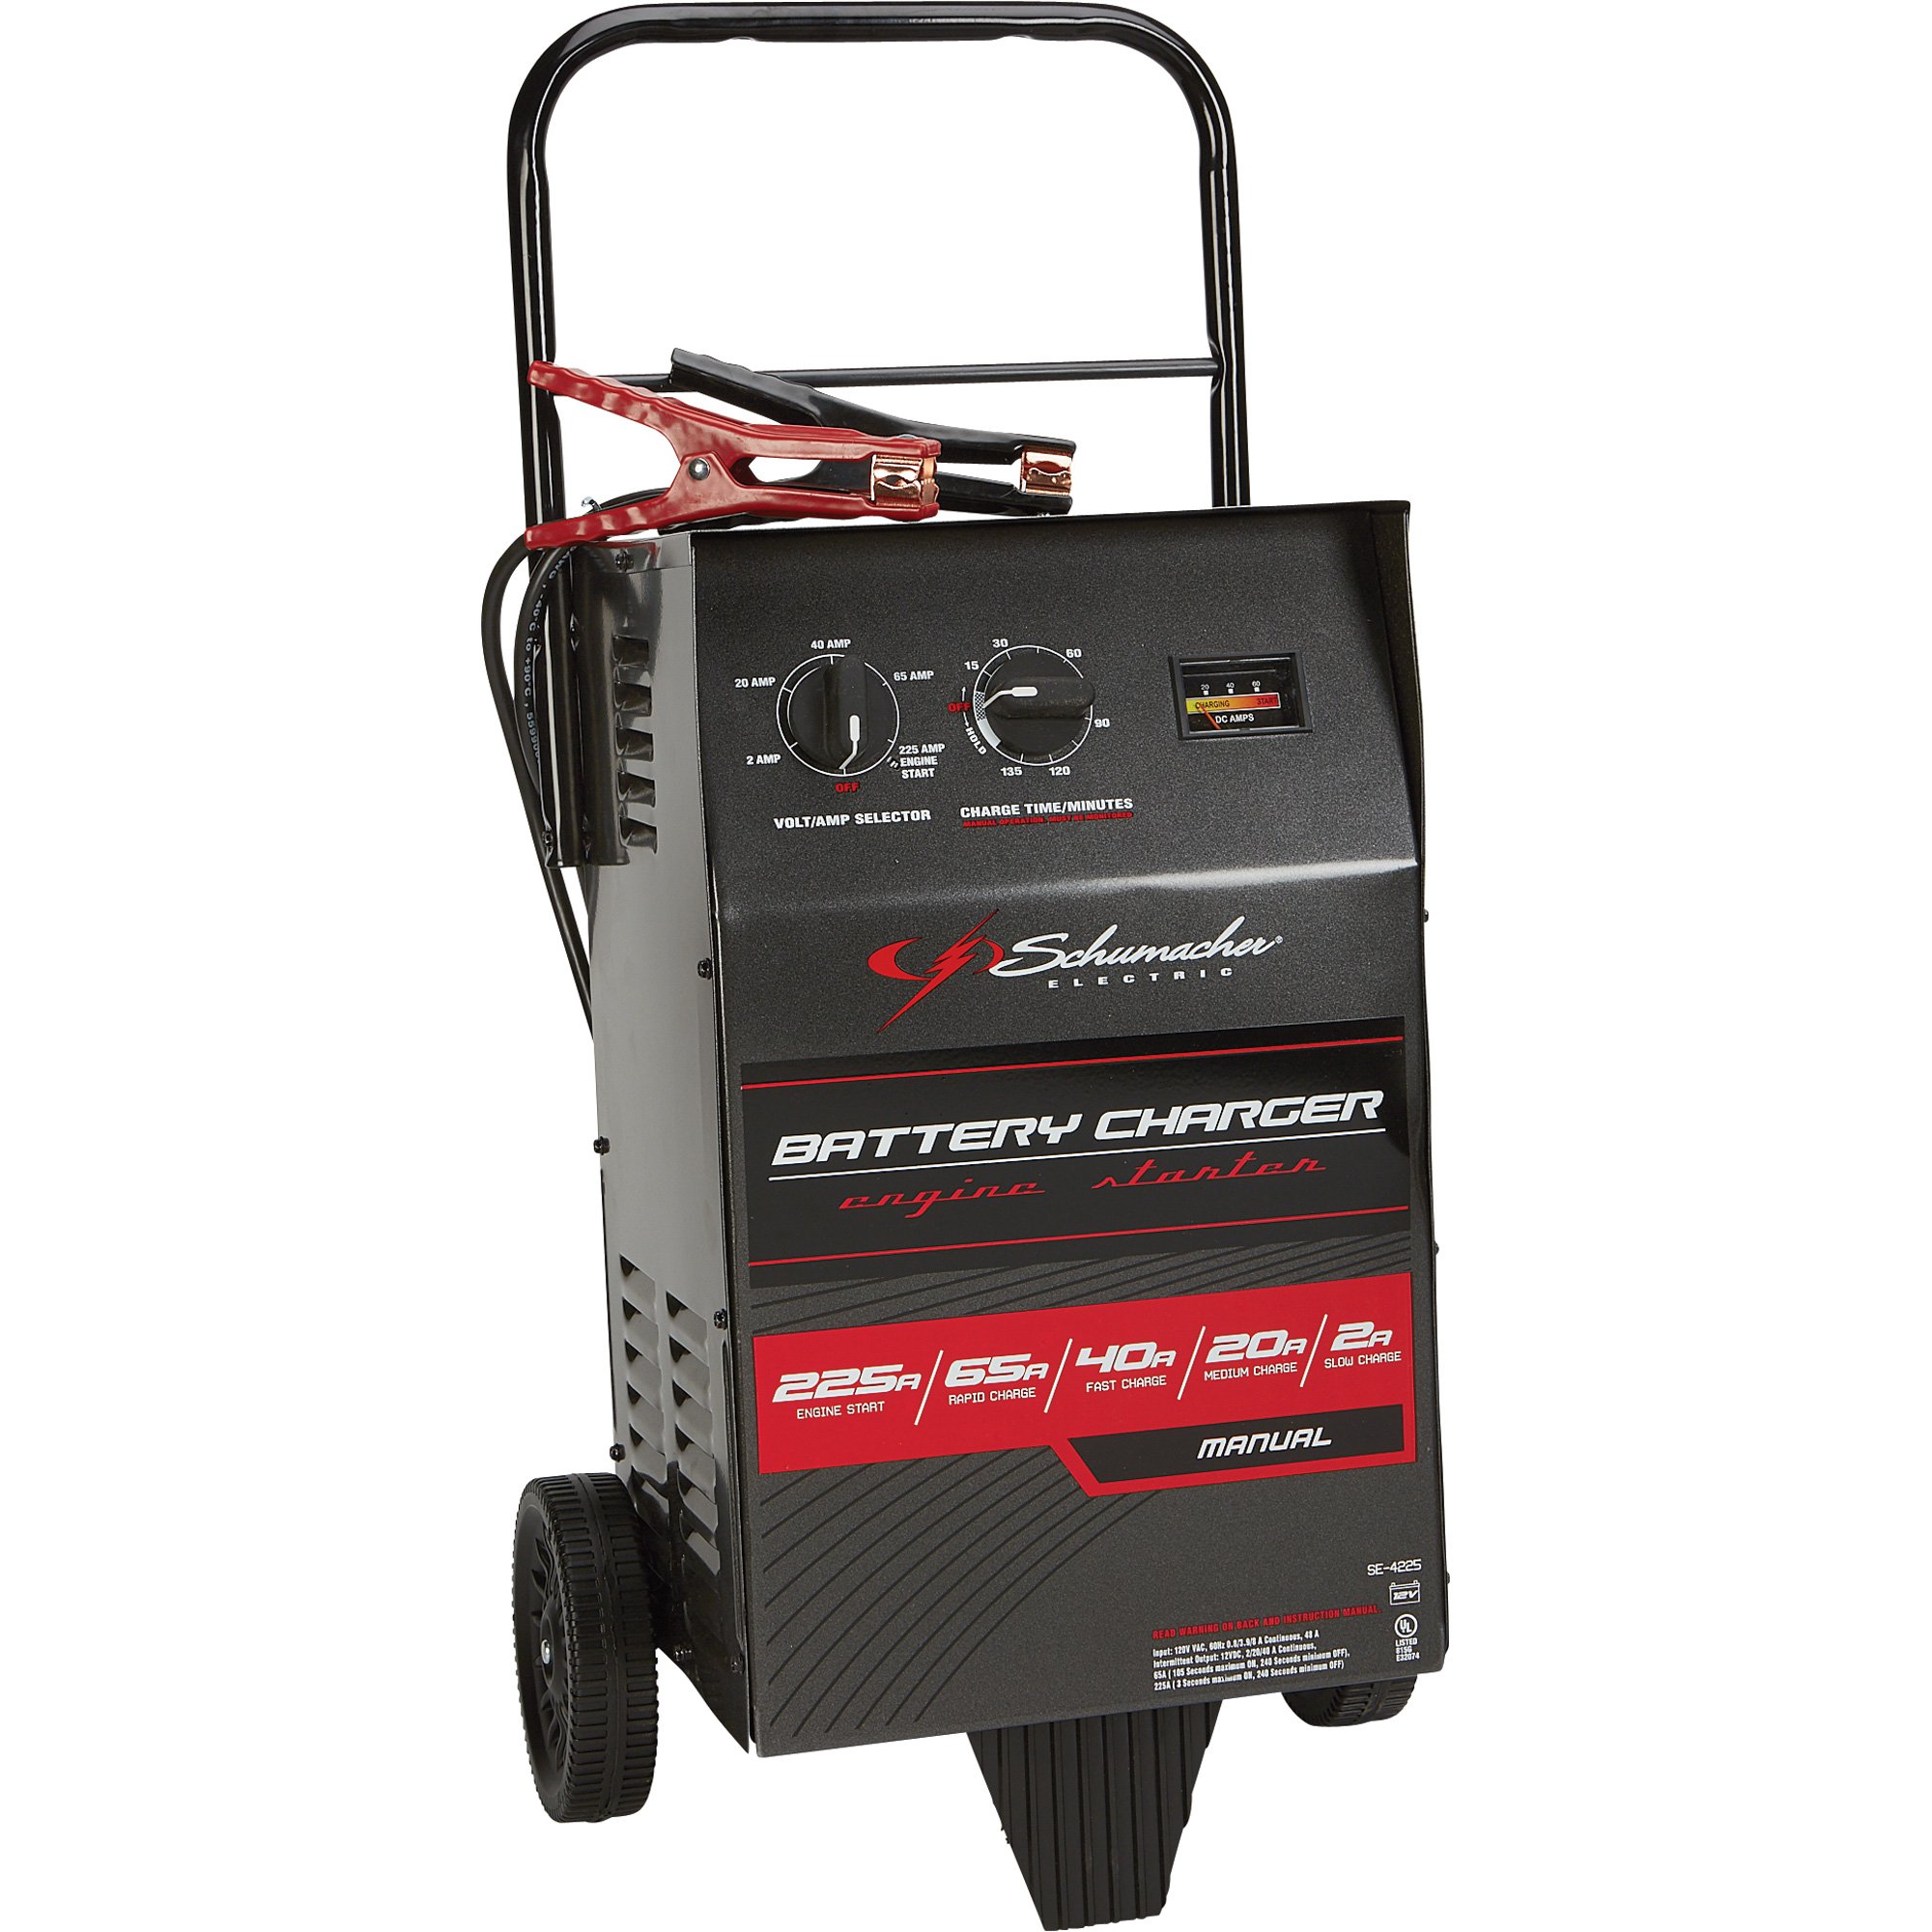 Schumacher 12 Volt Elite Wheeled Battery Charger with Engine Start —  2/20/40/65/225 Amp Capabilities, Model# SE-4225 | Northern Tool